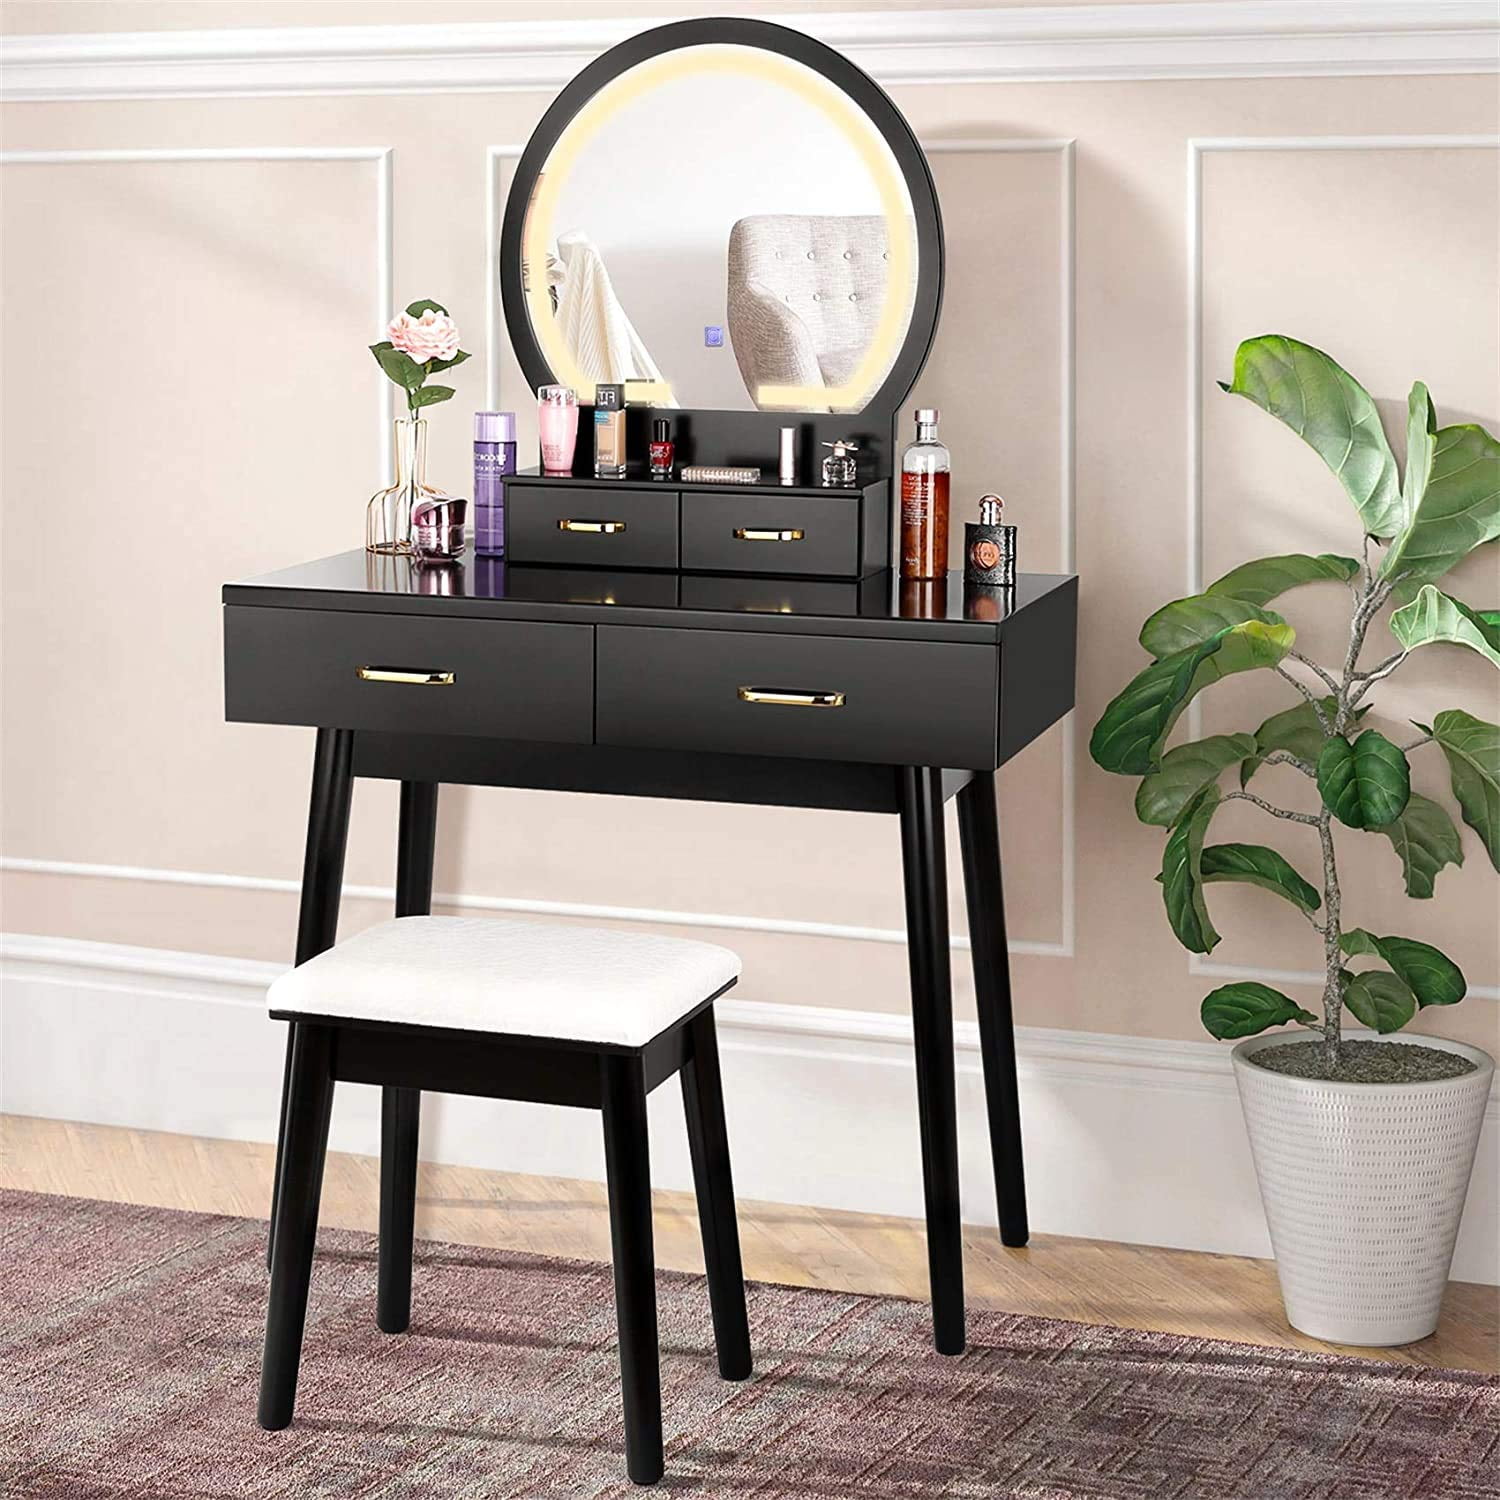 Amzdeal Vanity Set With Lighted Mirror, Black Vanity Desk With Lighted Mirror